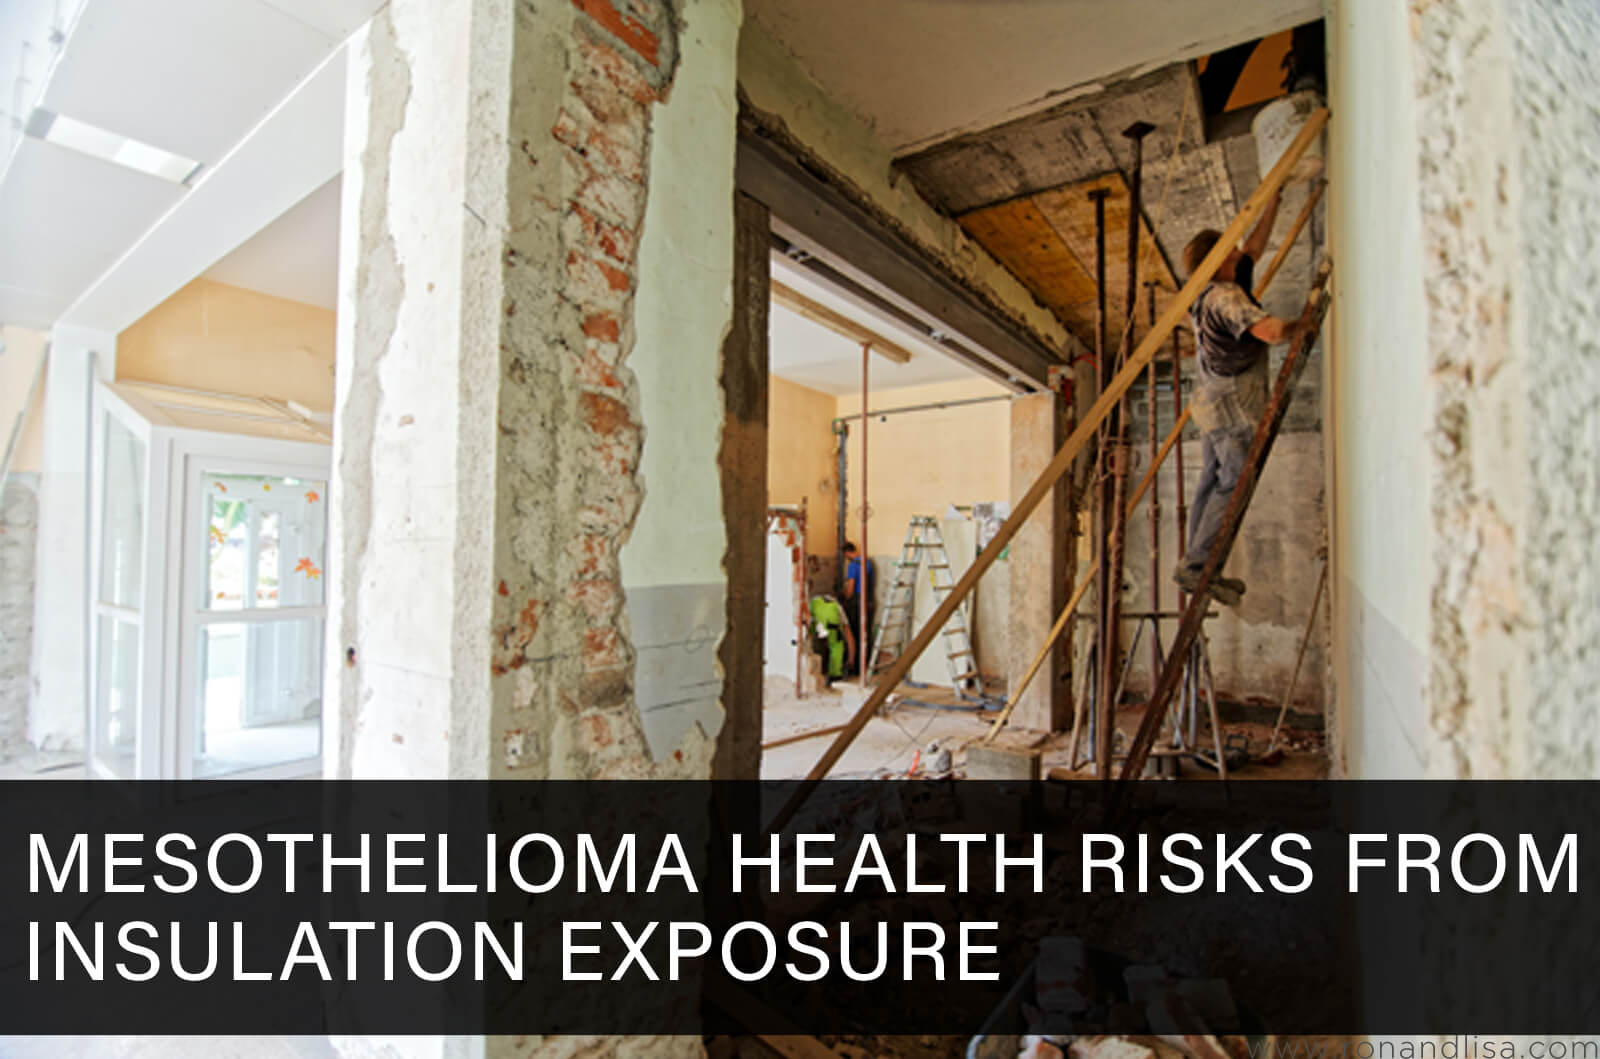 Mesothelioma Health Risks From Insulation Exposure